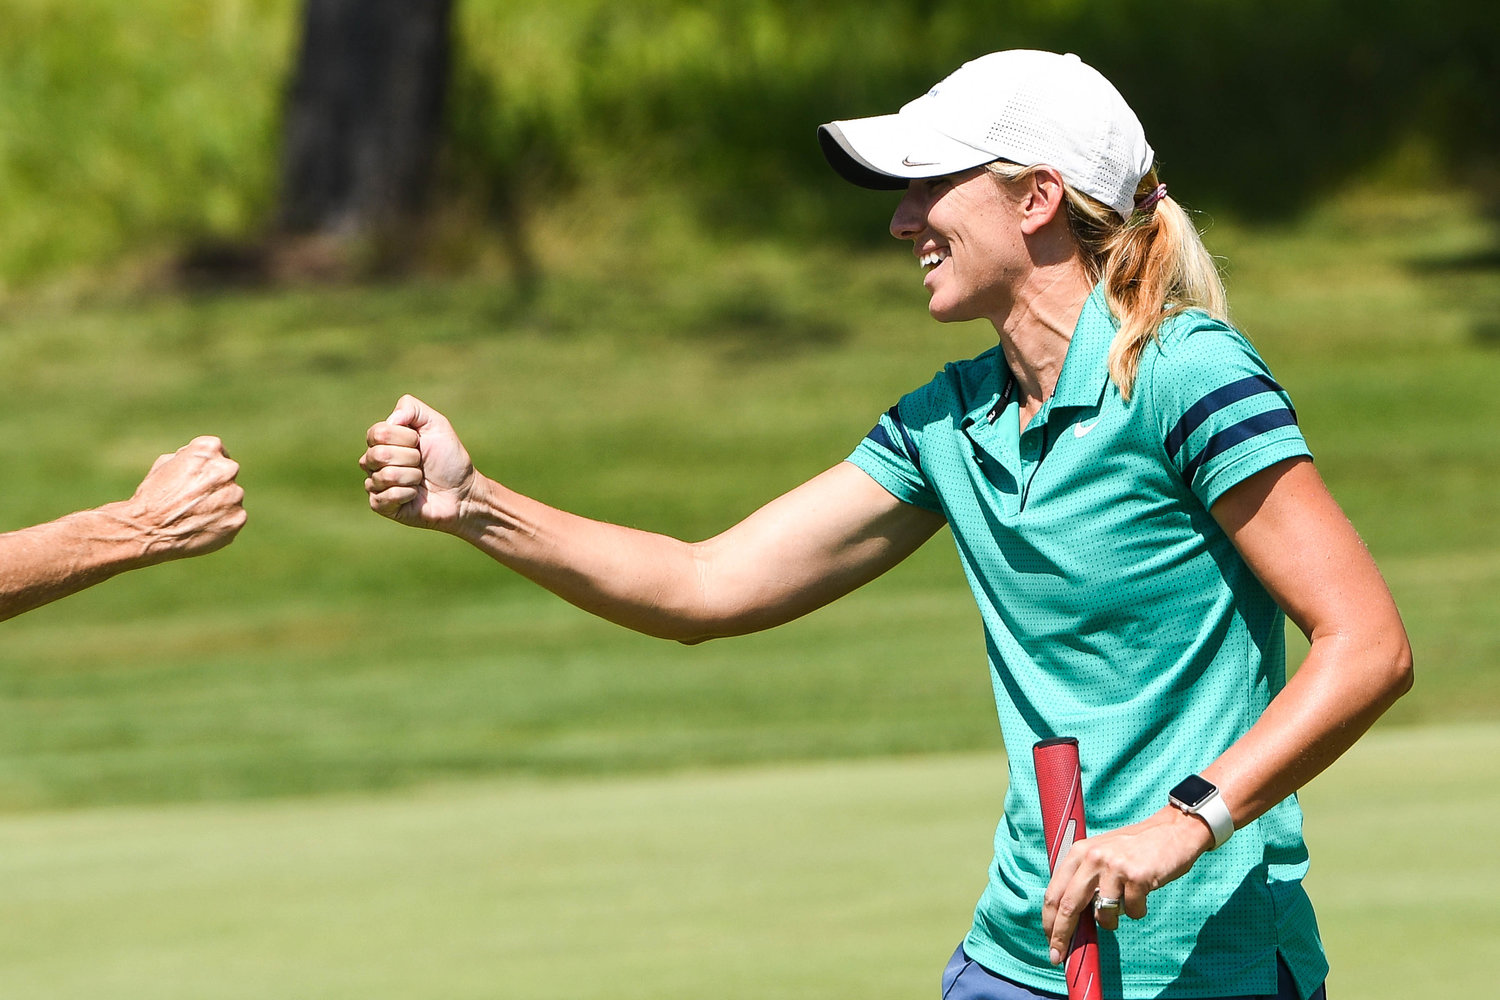 Lauren Cupp celebrates after completing the Rome City Women’s Amateur Golf Championship on Monday at Rome Country Club. Cupp shot a 69, a women’s course record, to lead the field of 16 golfers. It was her ninth title.